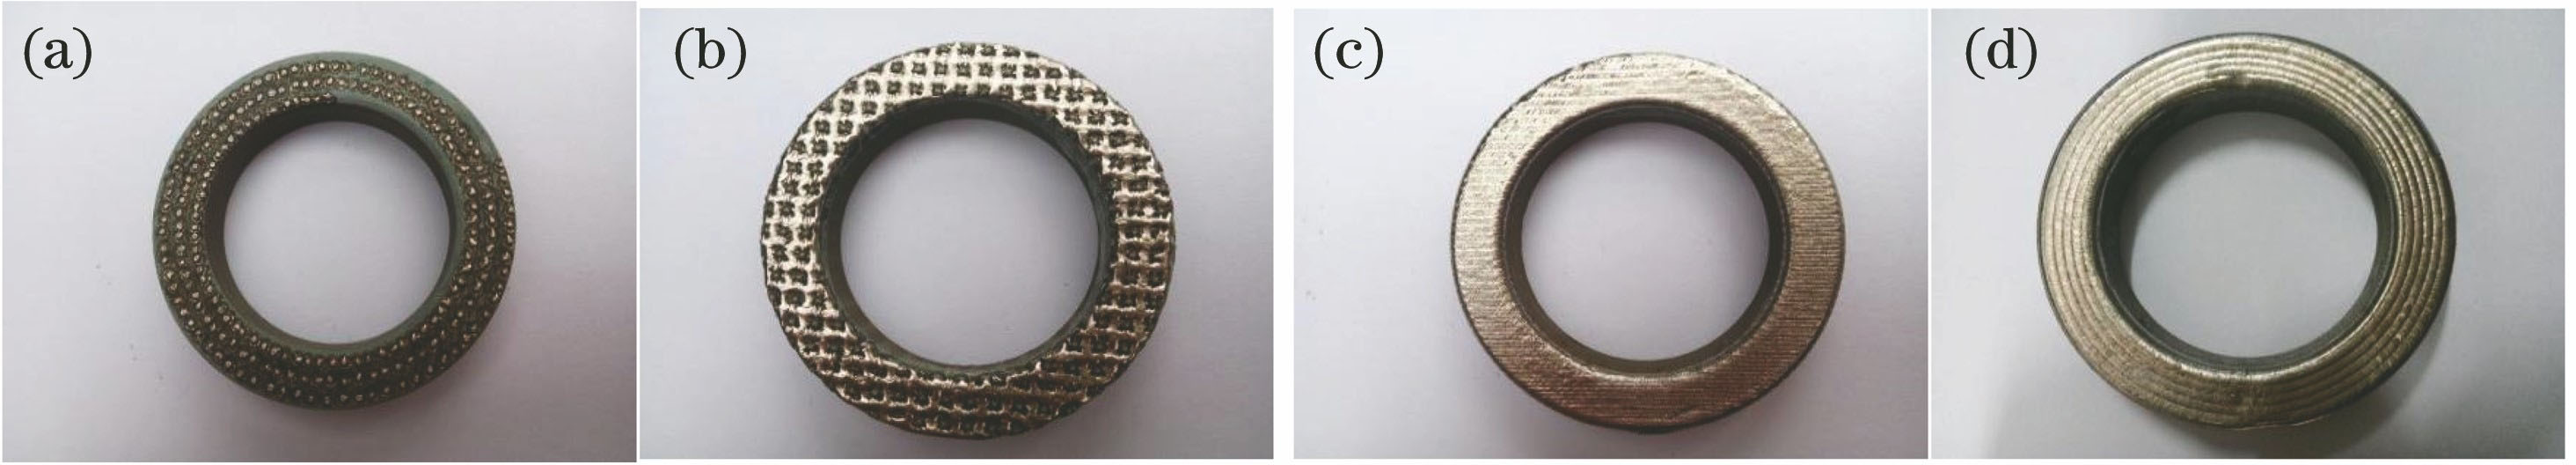 Surface morphologies of coatings under different laser remelting trajectories.(a) Dotted; (b) rectangular; (c) parallel; (d) circular